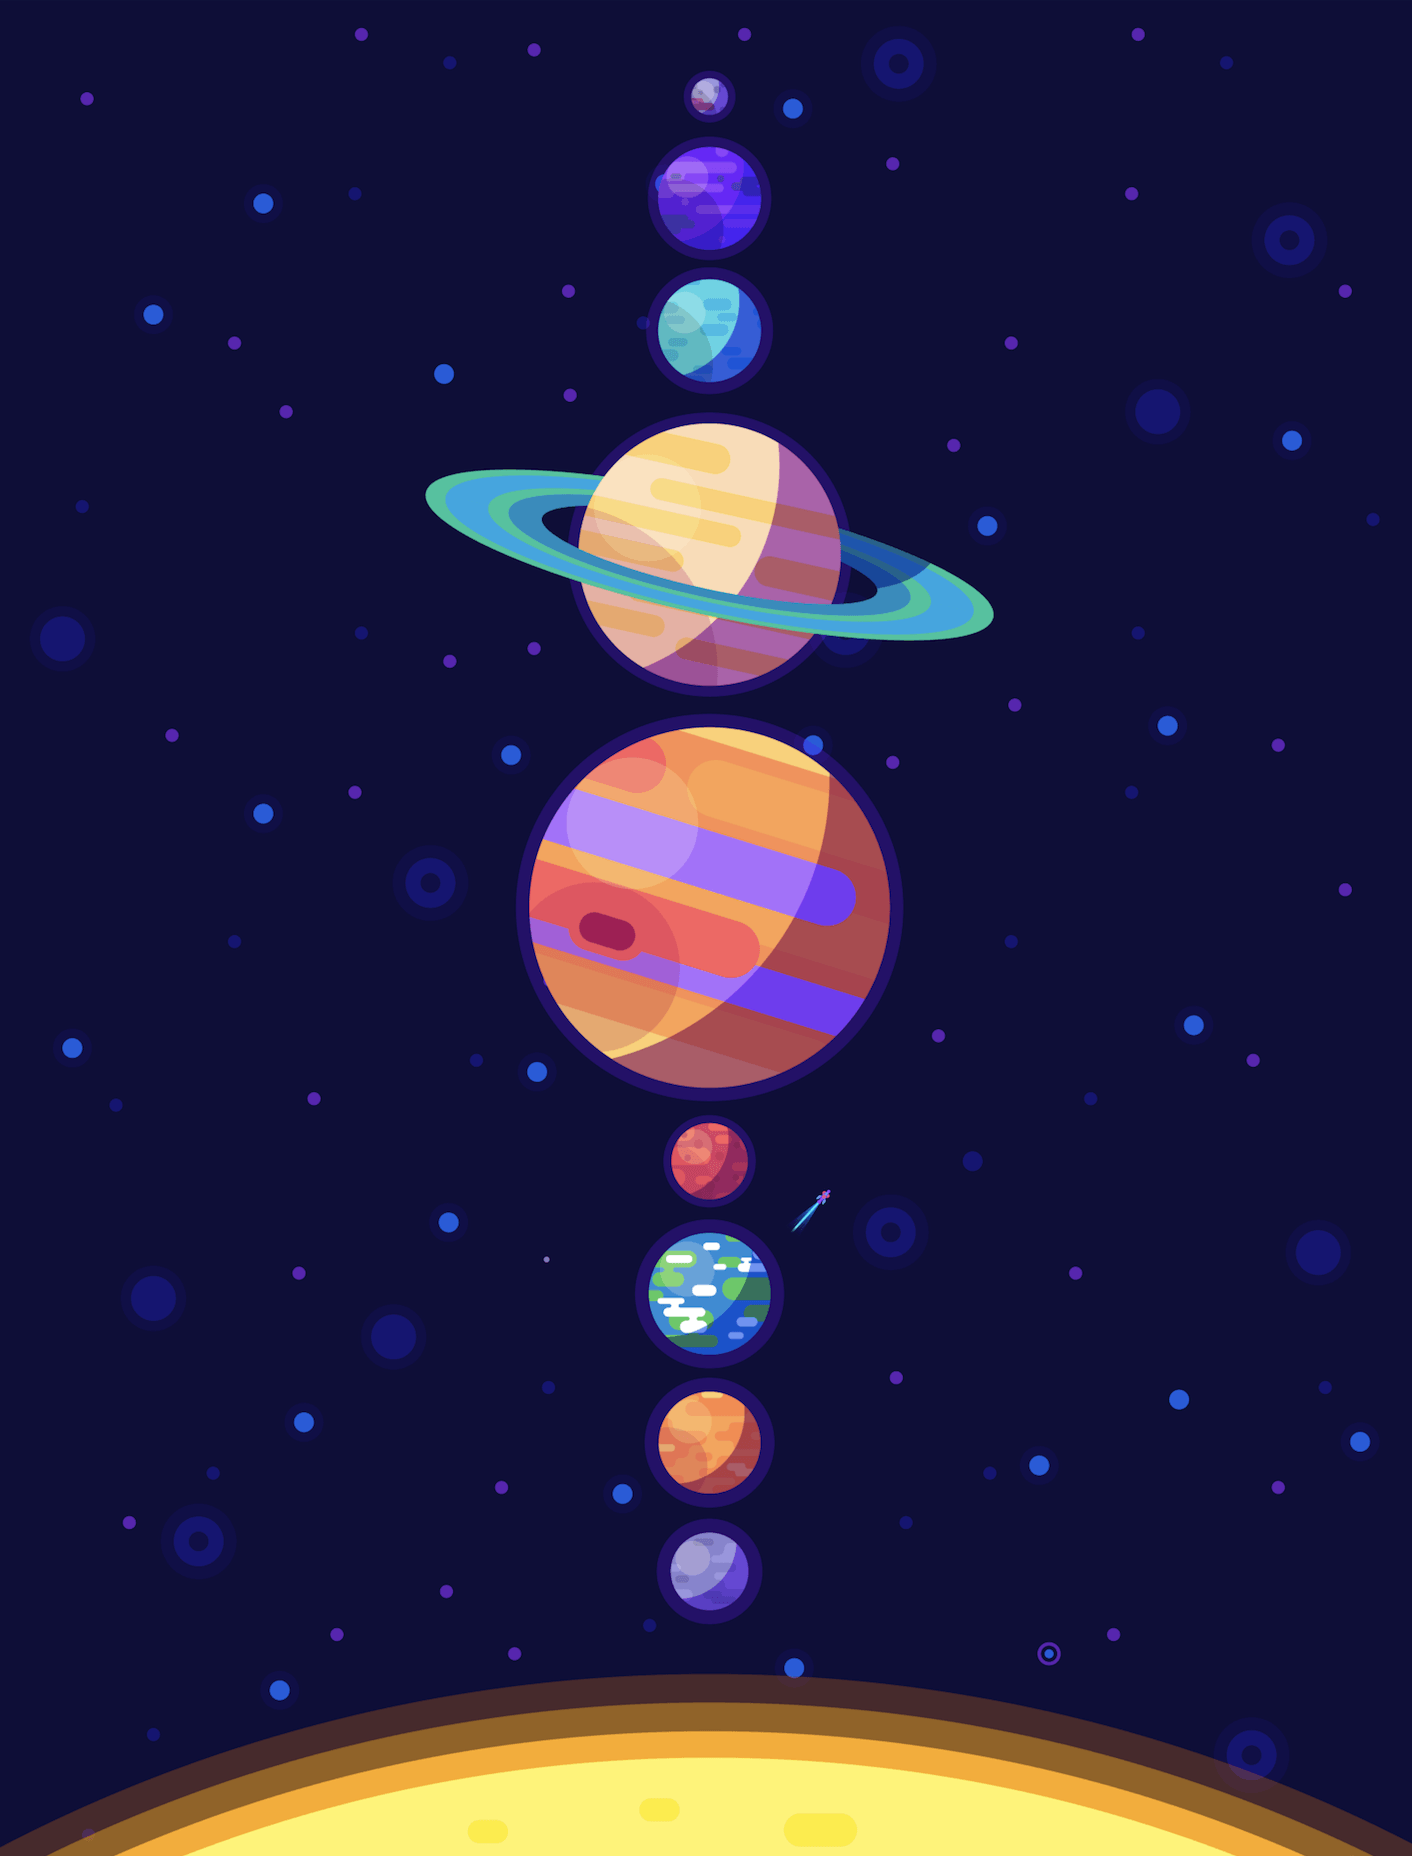 solar system wallpaper for iphone